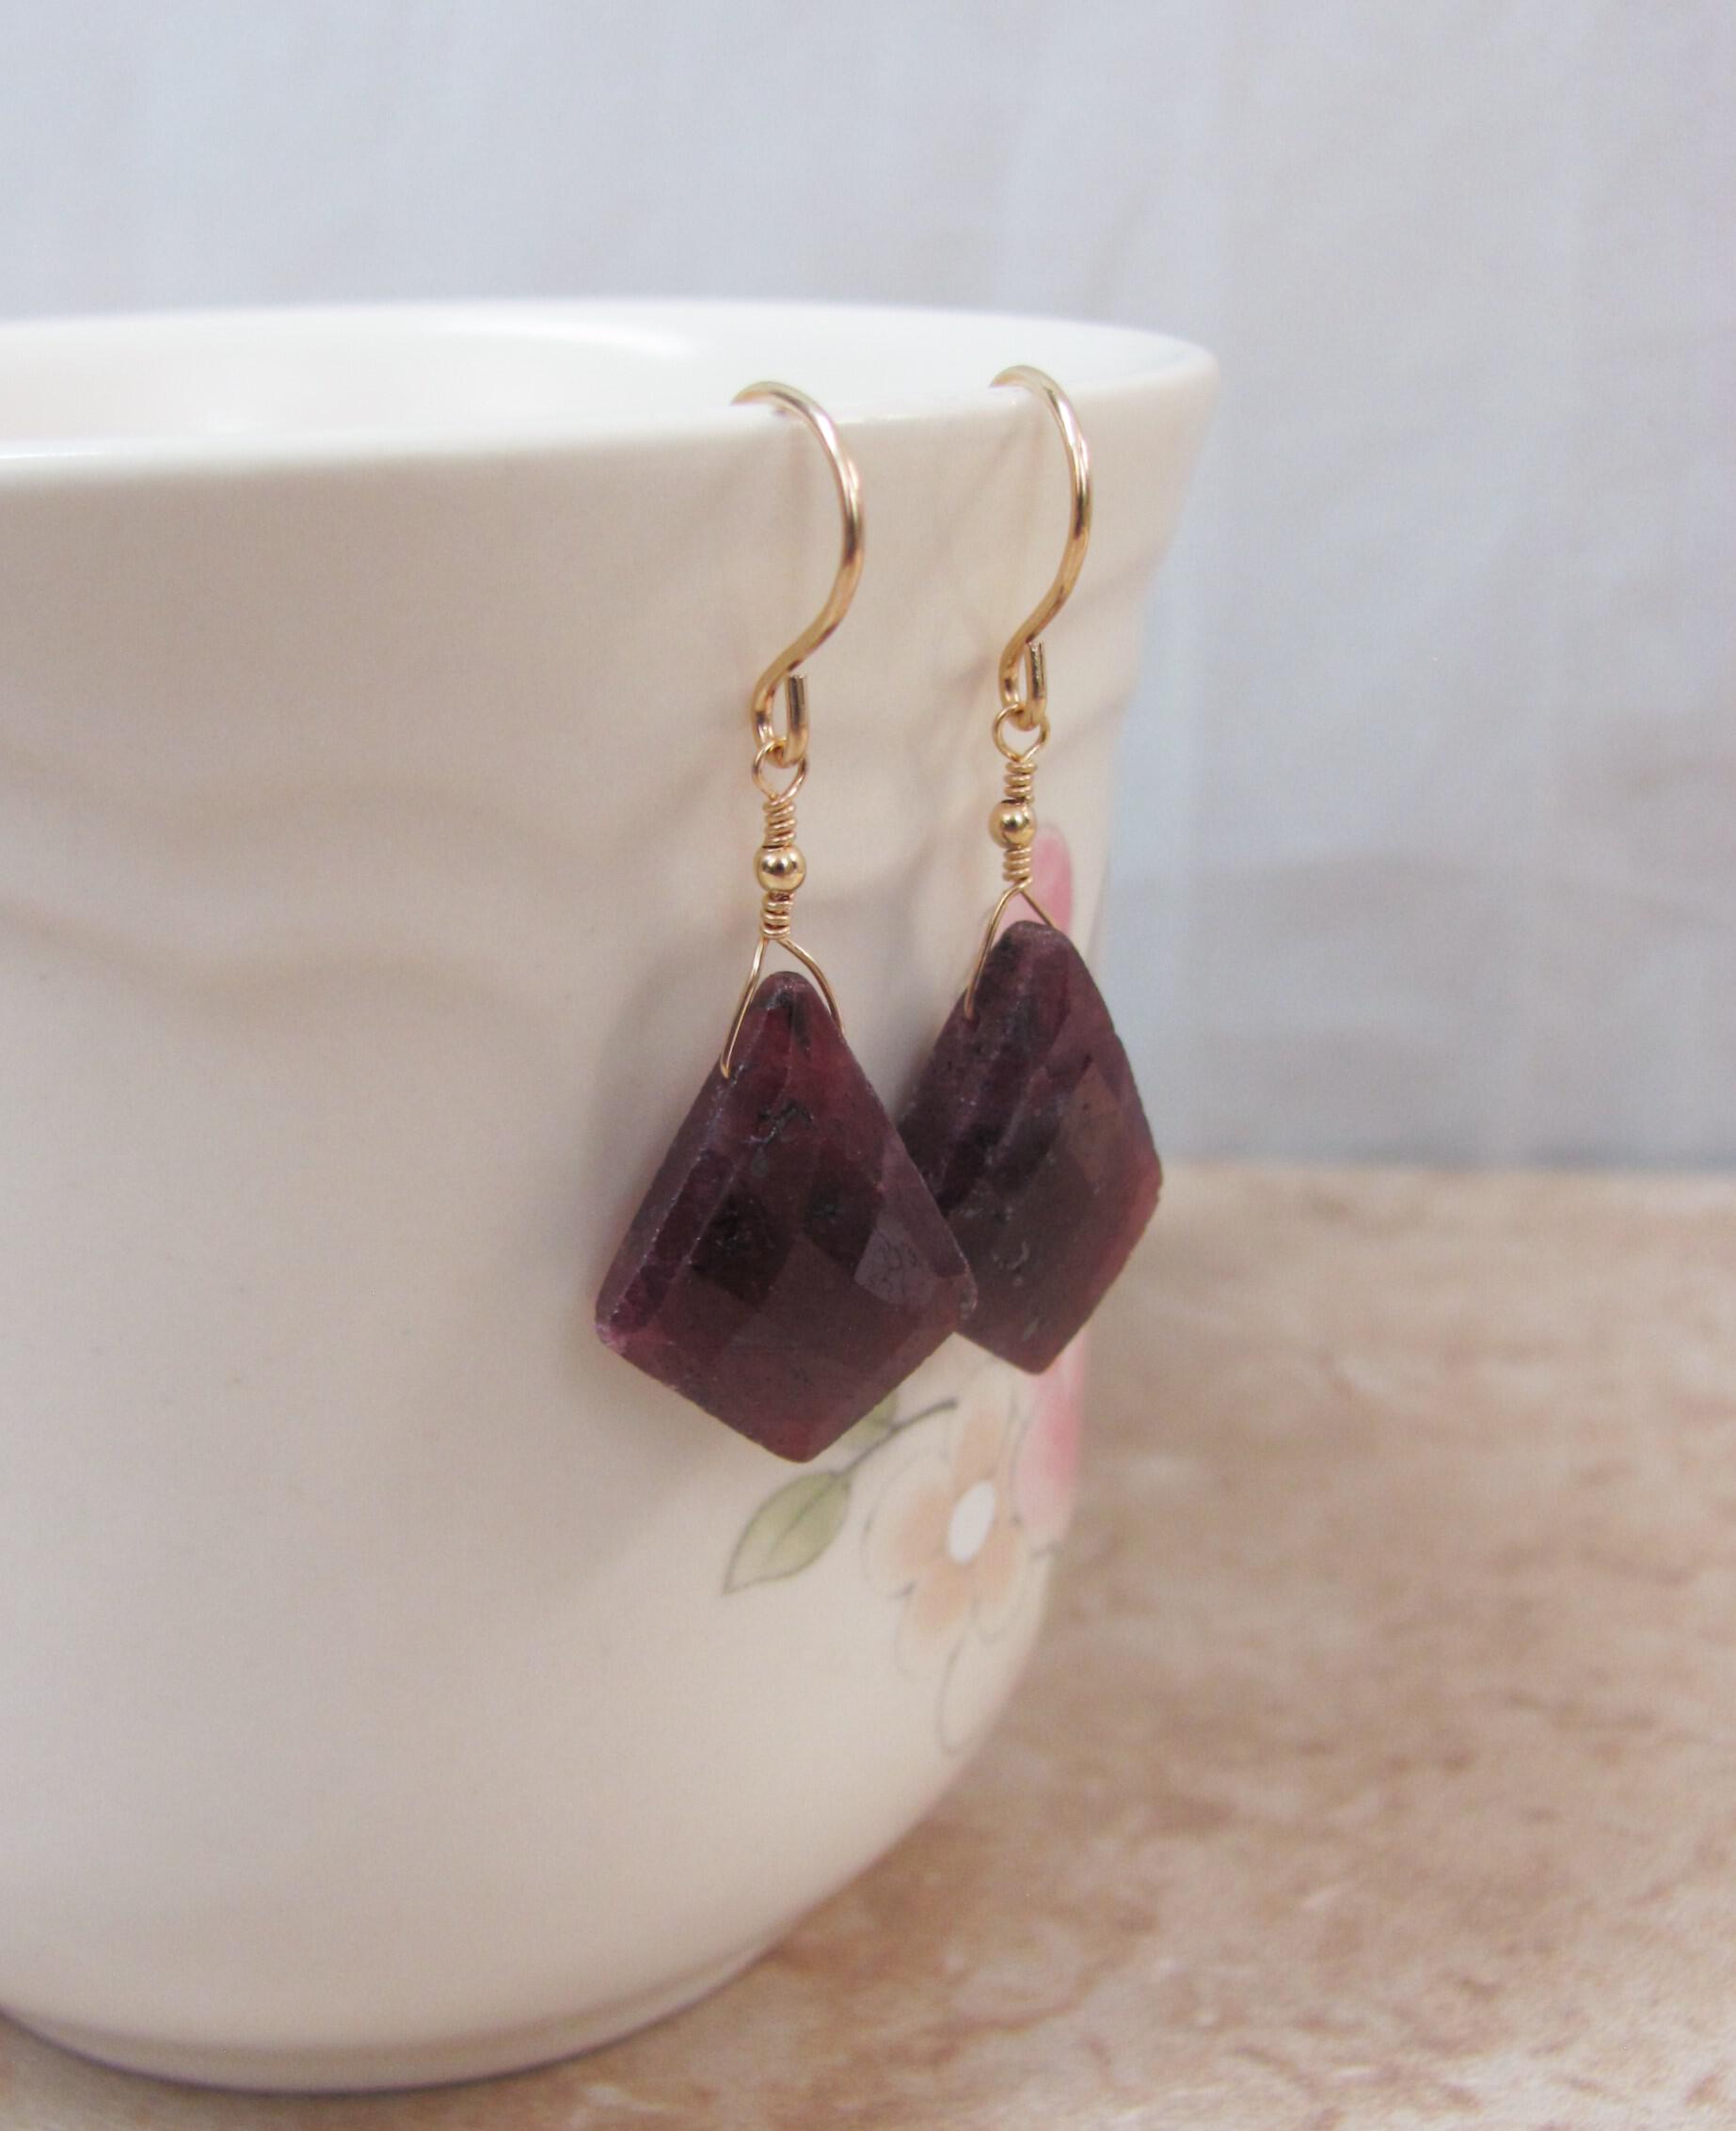 Raw Stone Earrings with Natural Ruby Gemstones